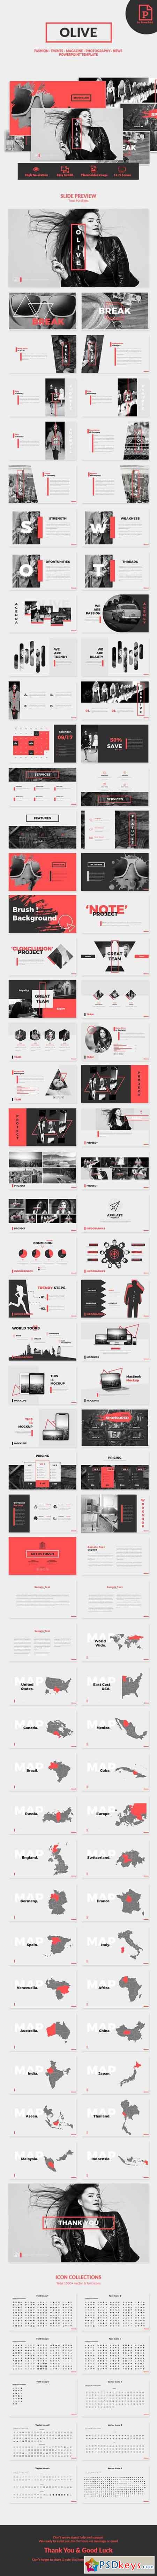 Olive - Creative PowerPoint Template 20738298